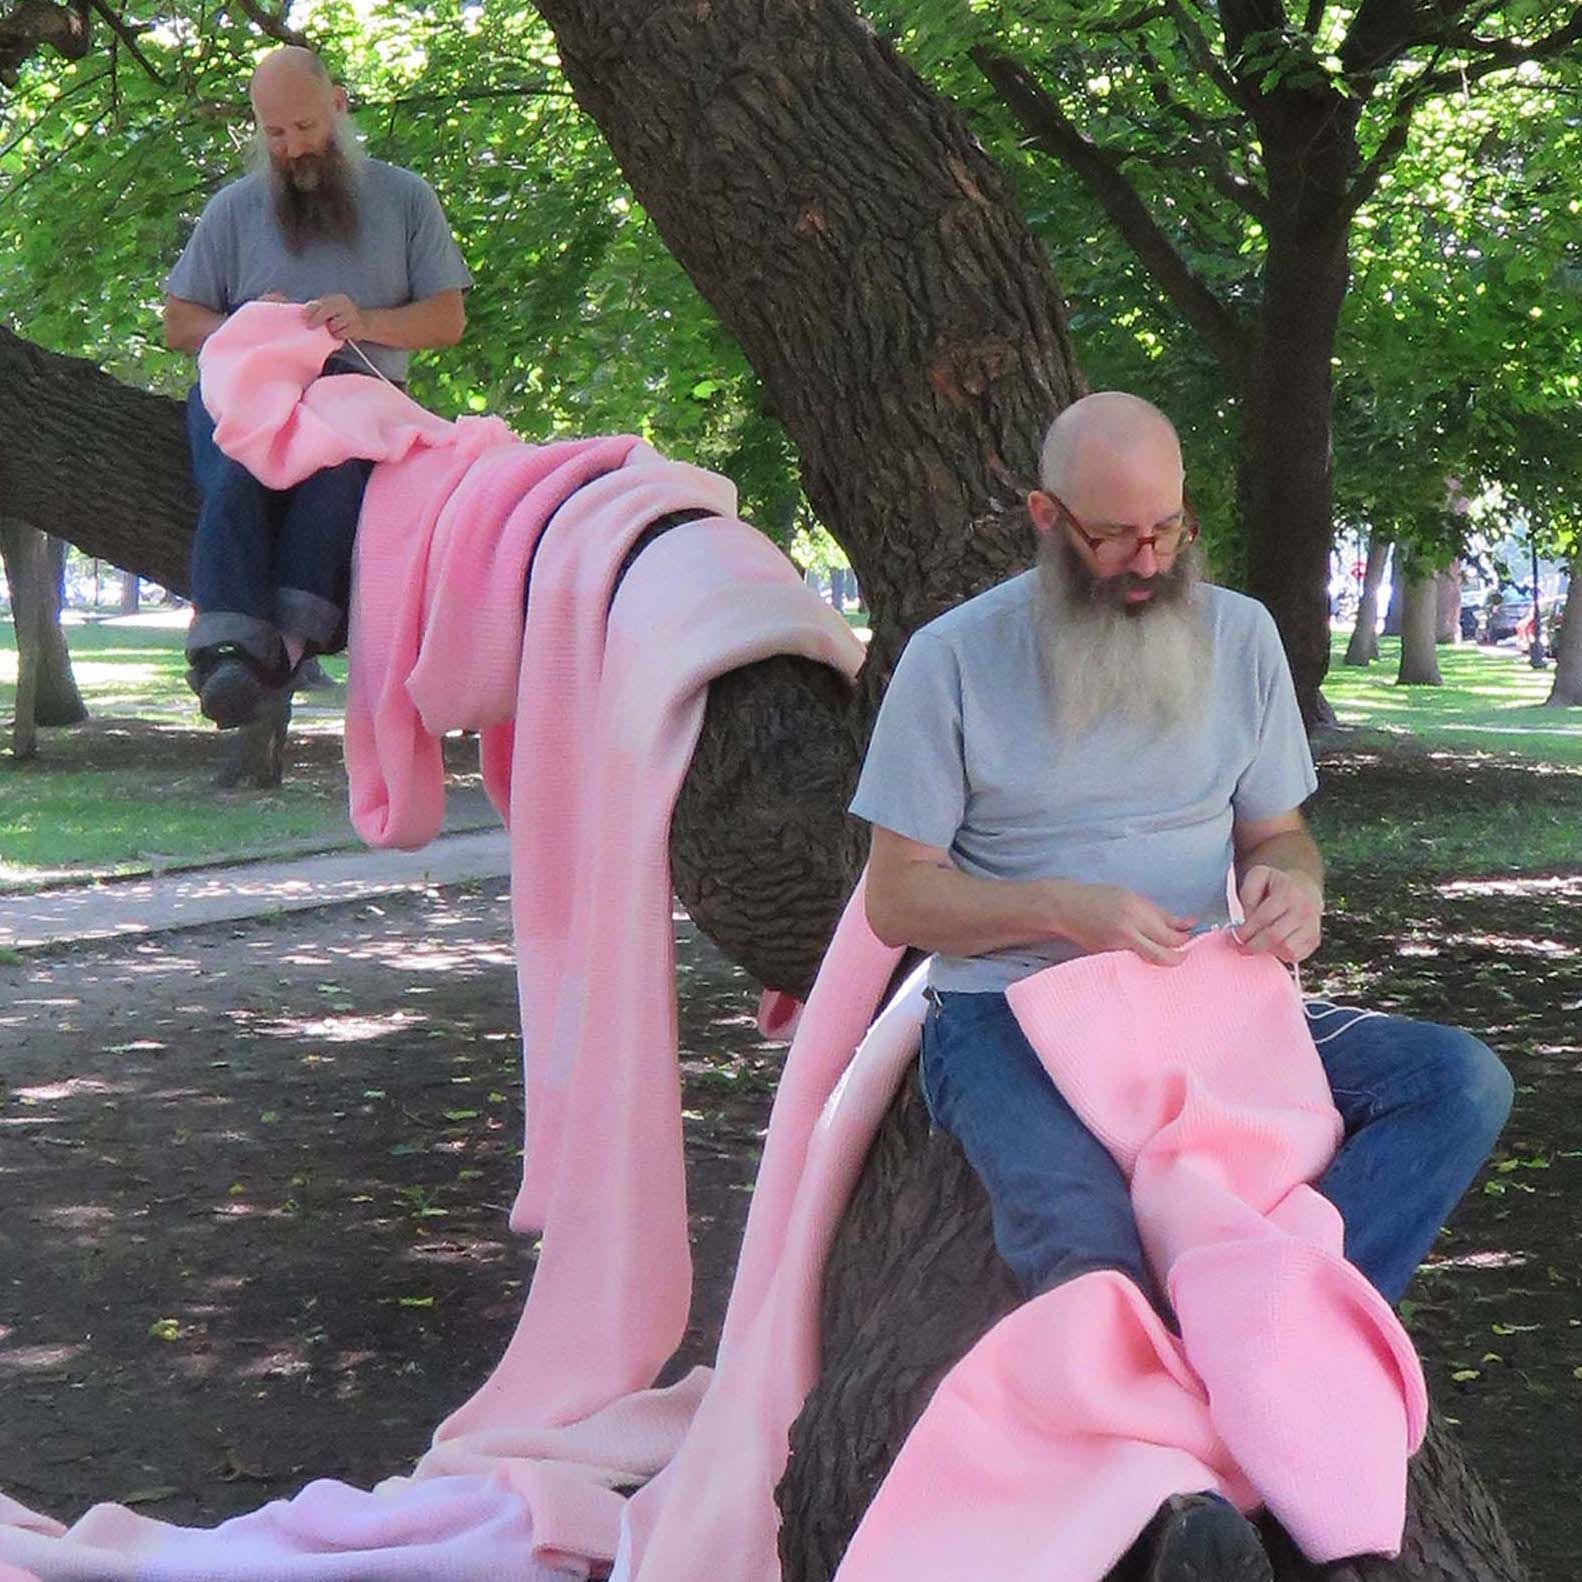 Miller and Shellabarger crocheting a pink tube while sitting in a tree.